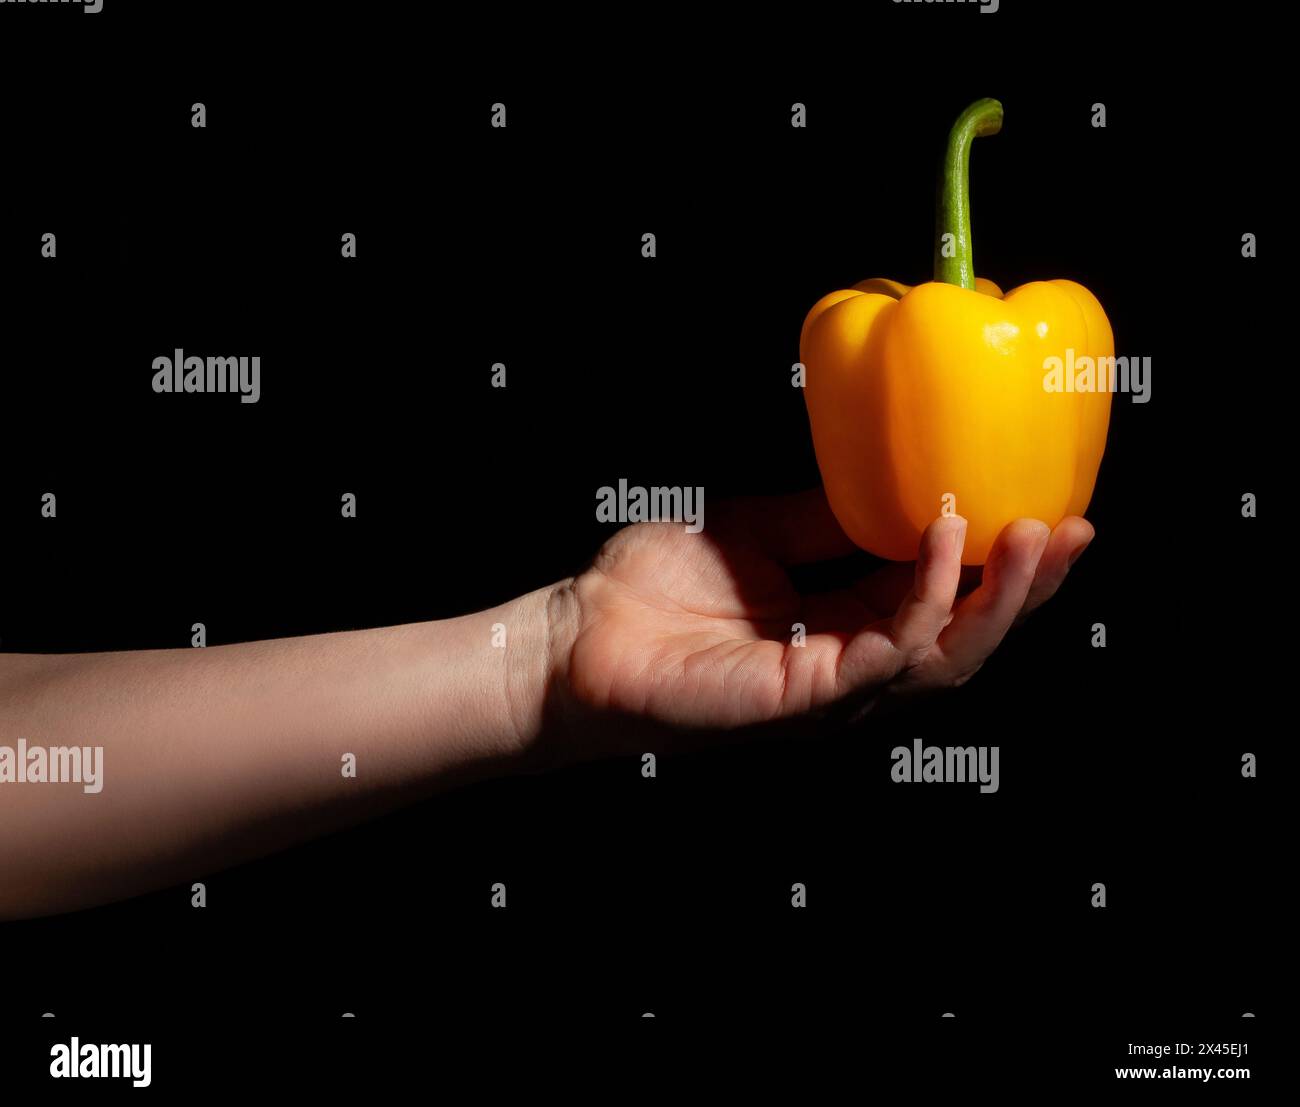 bell pepper in hand on black background Stock Photo